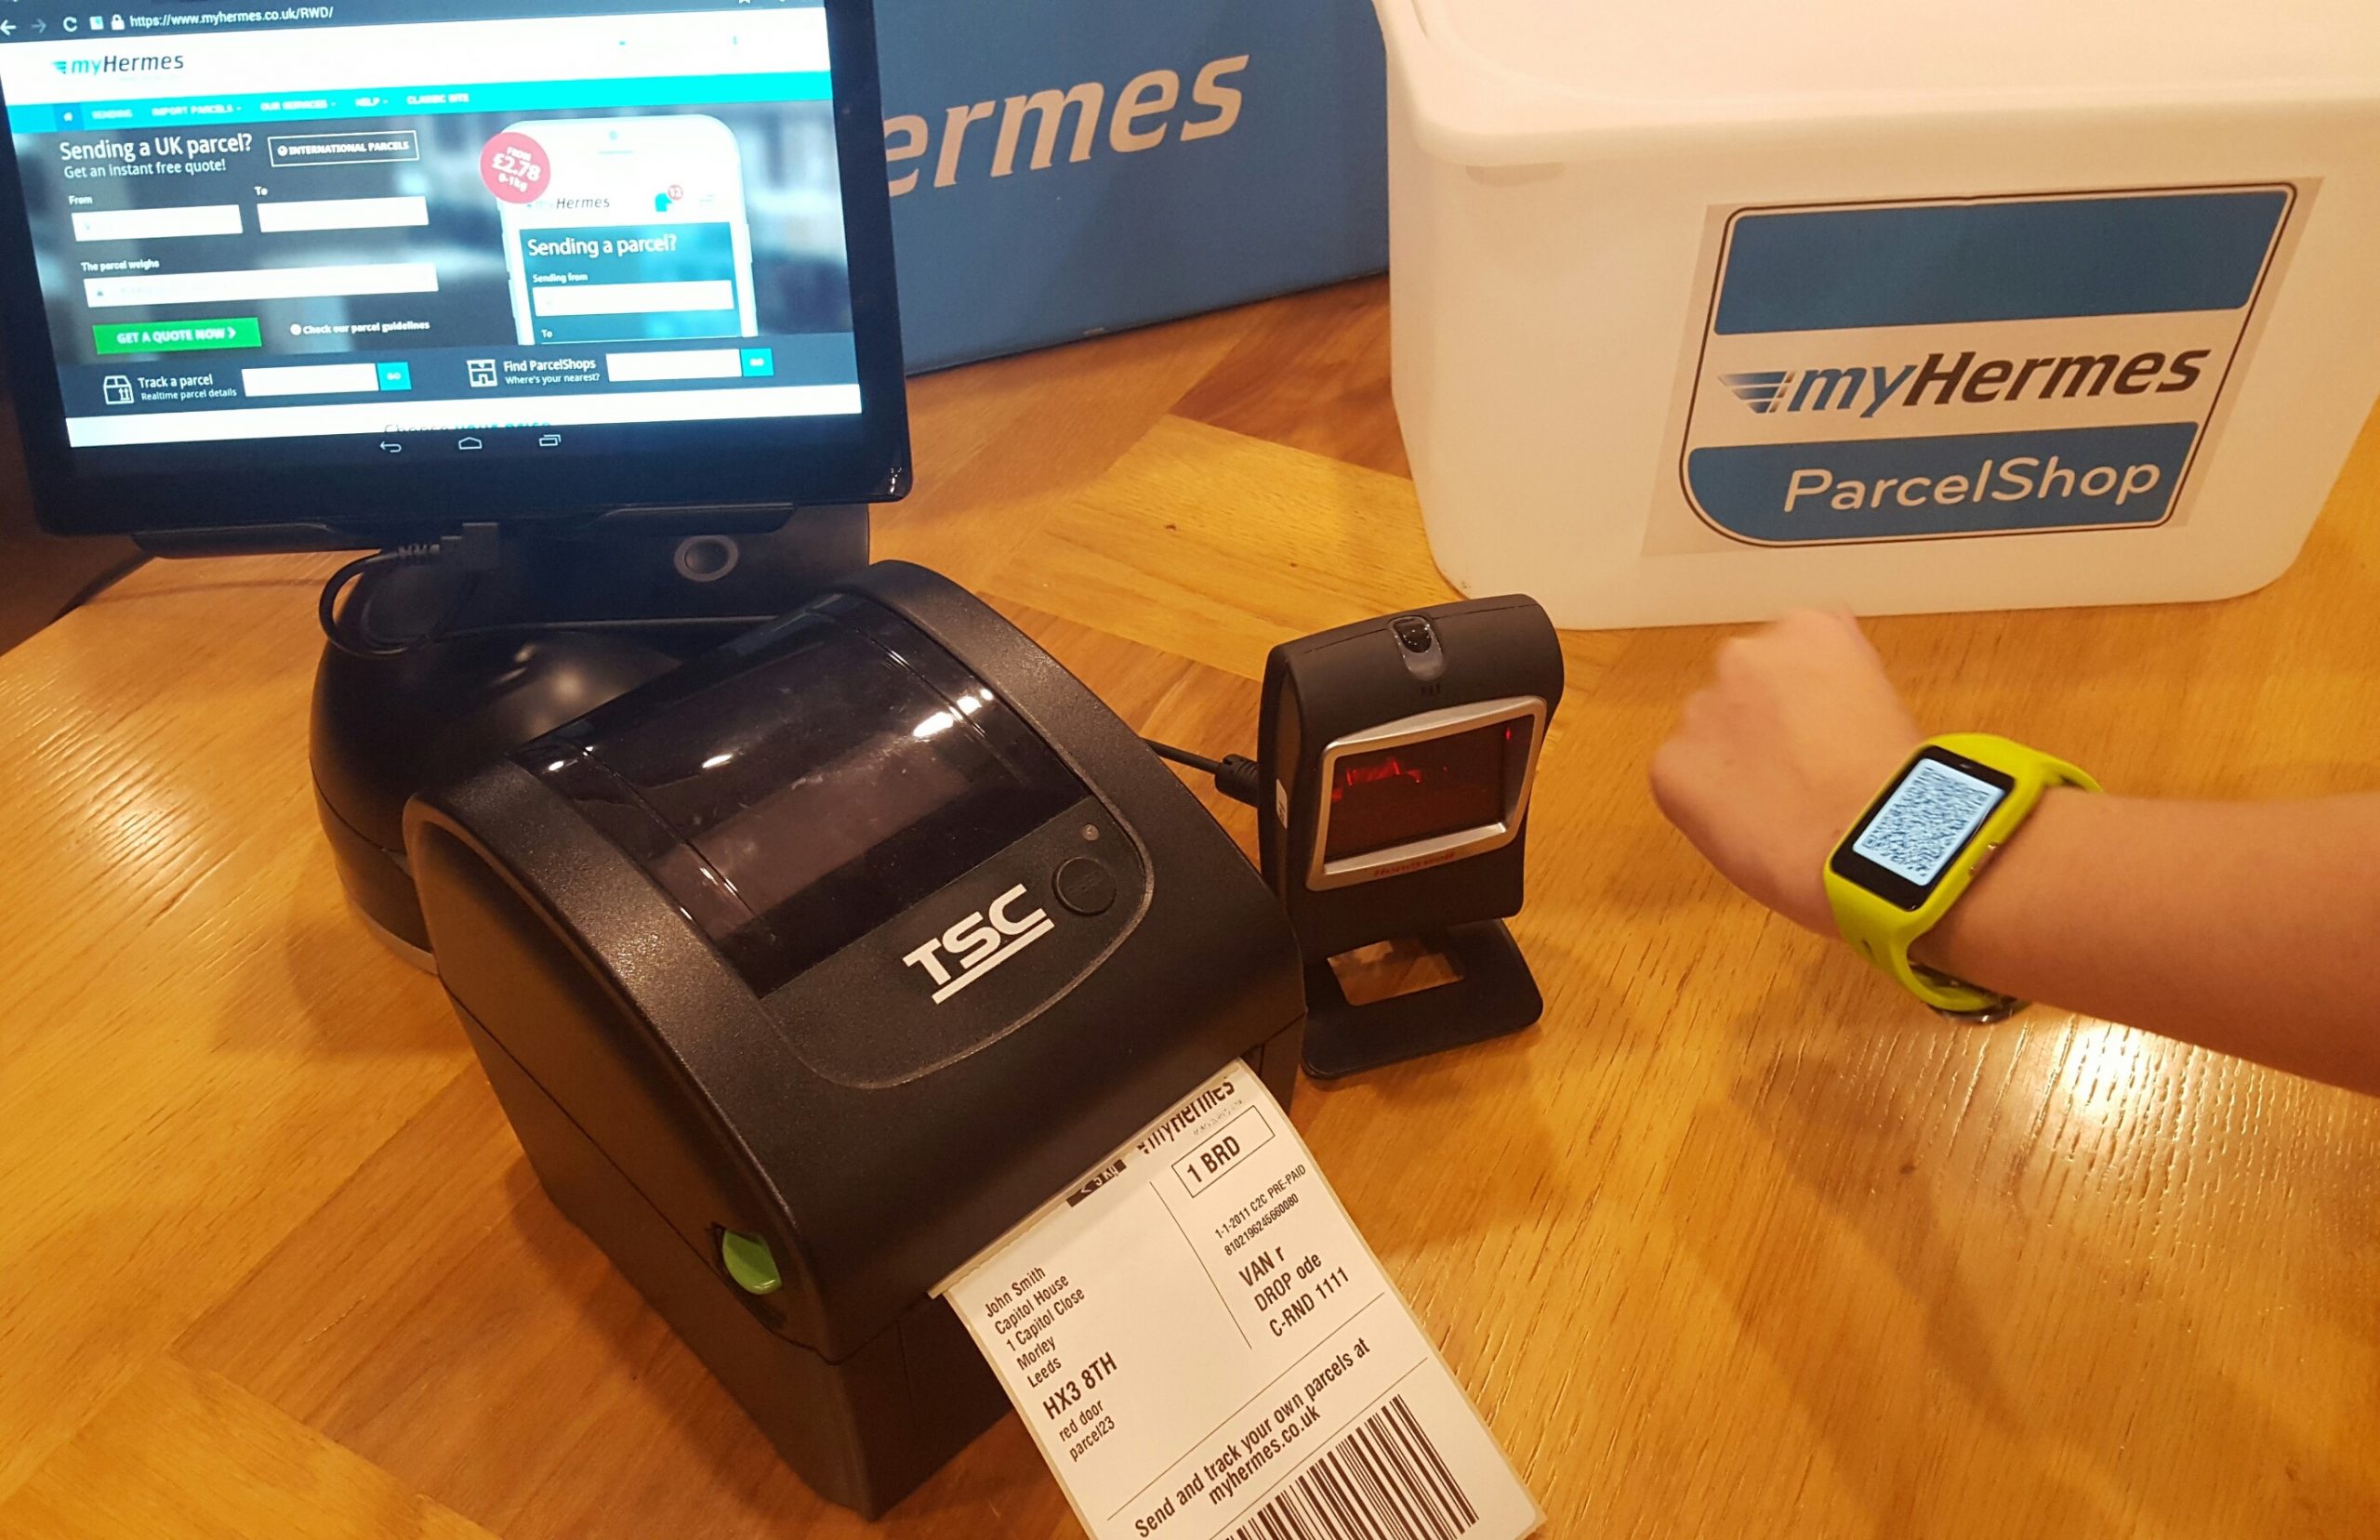 myHermes trialling in-store label printing system